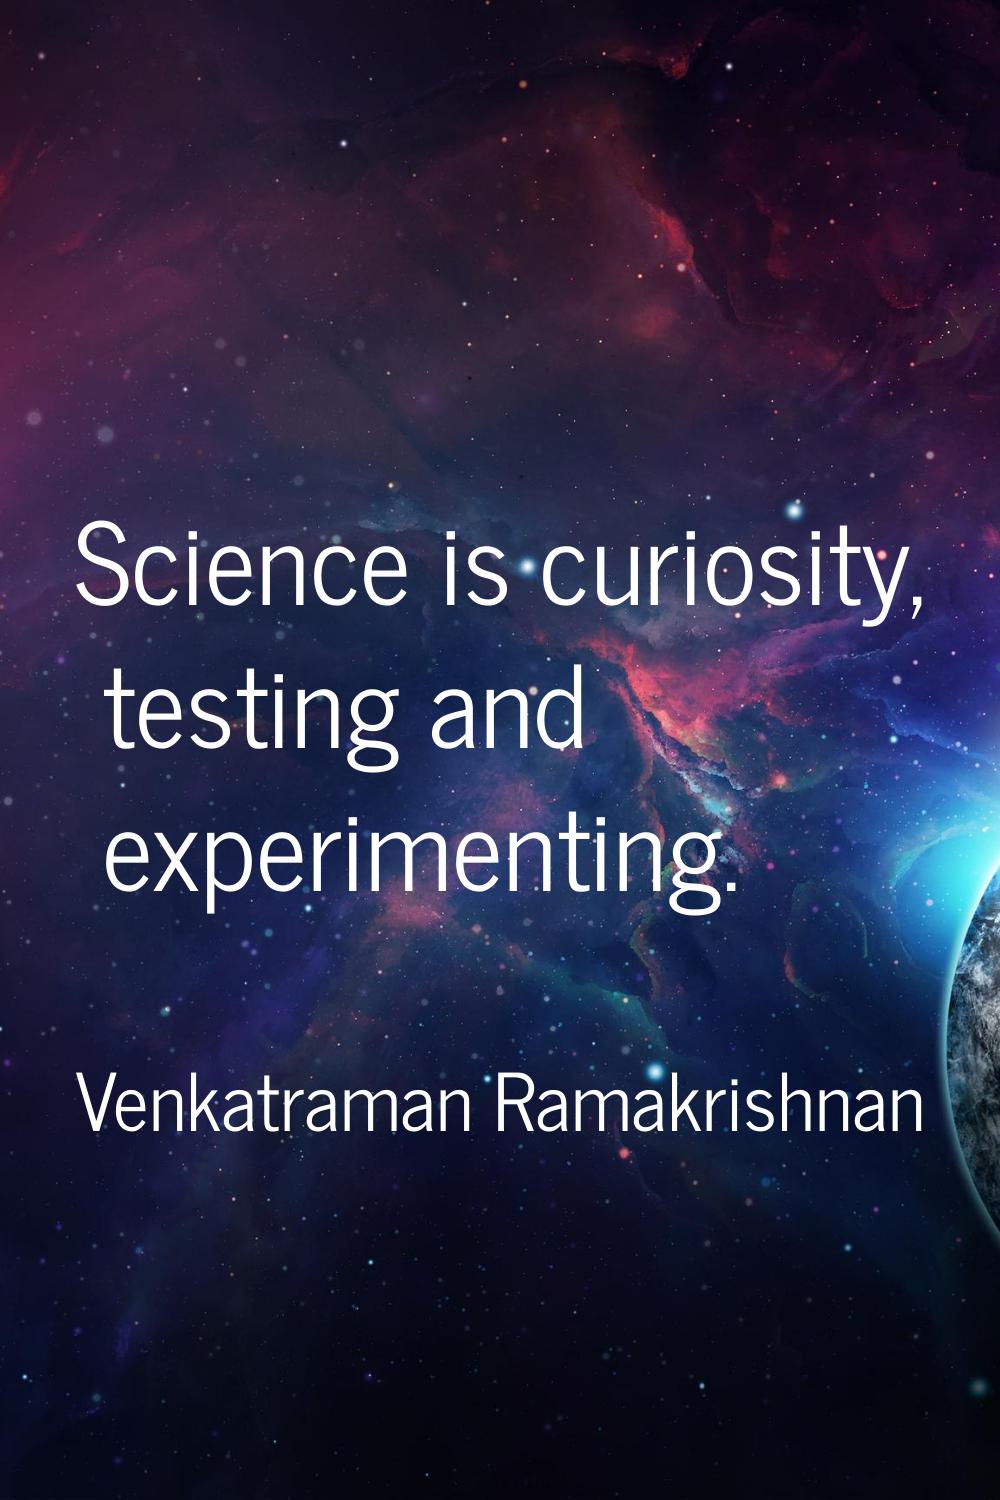 Science is curiosity, testing and experimenting.